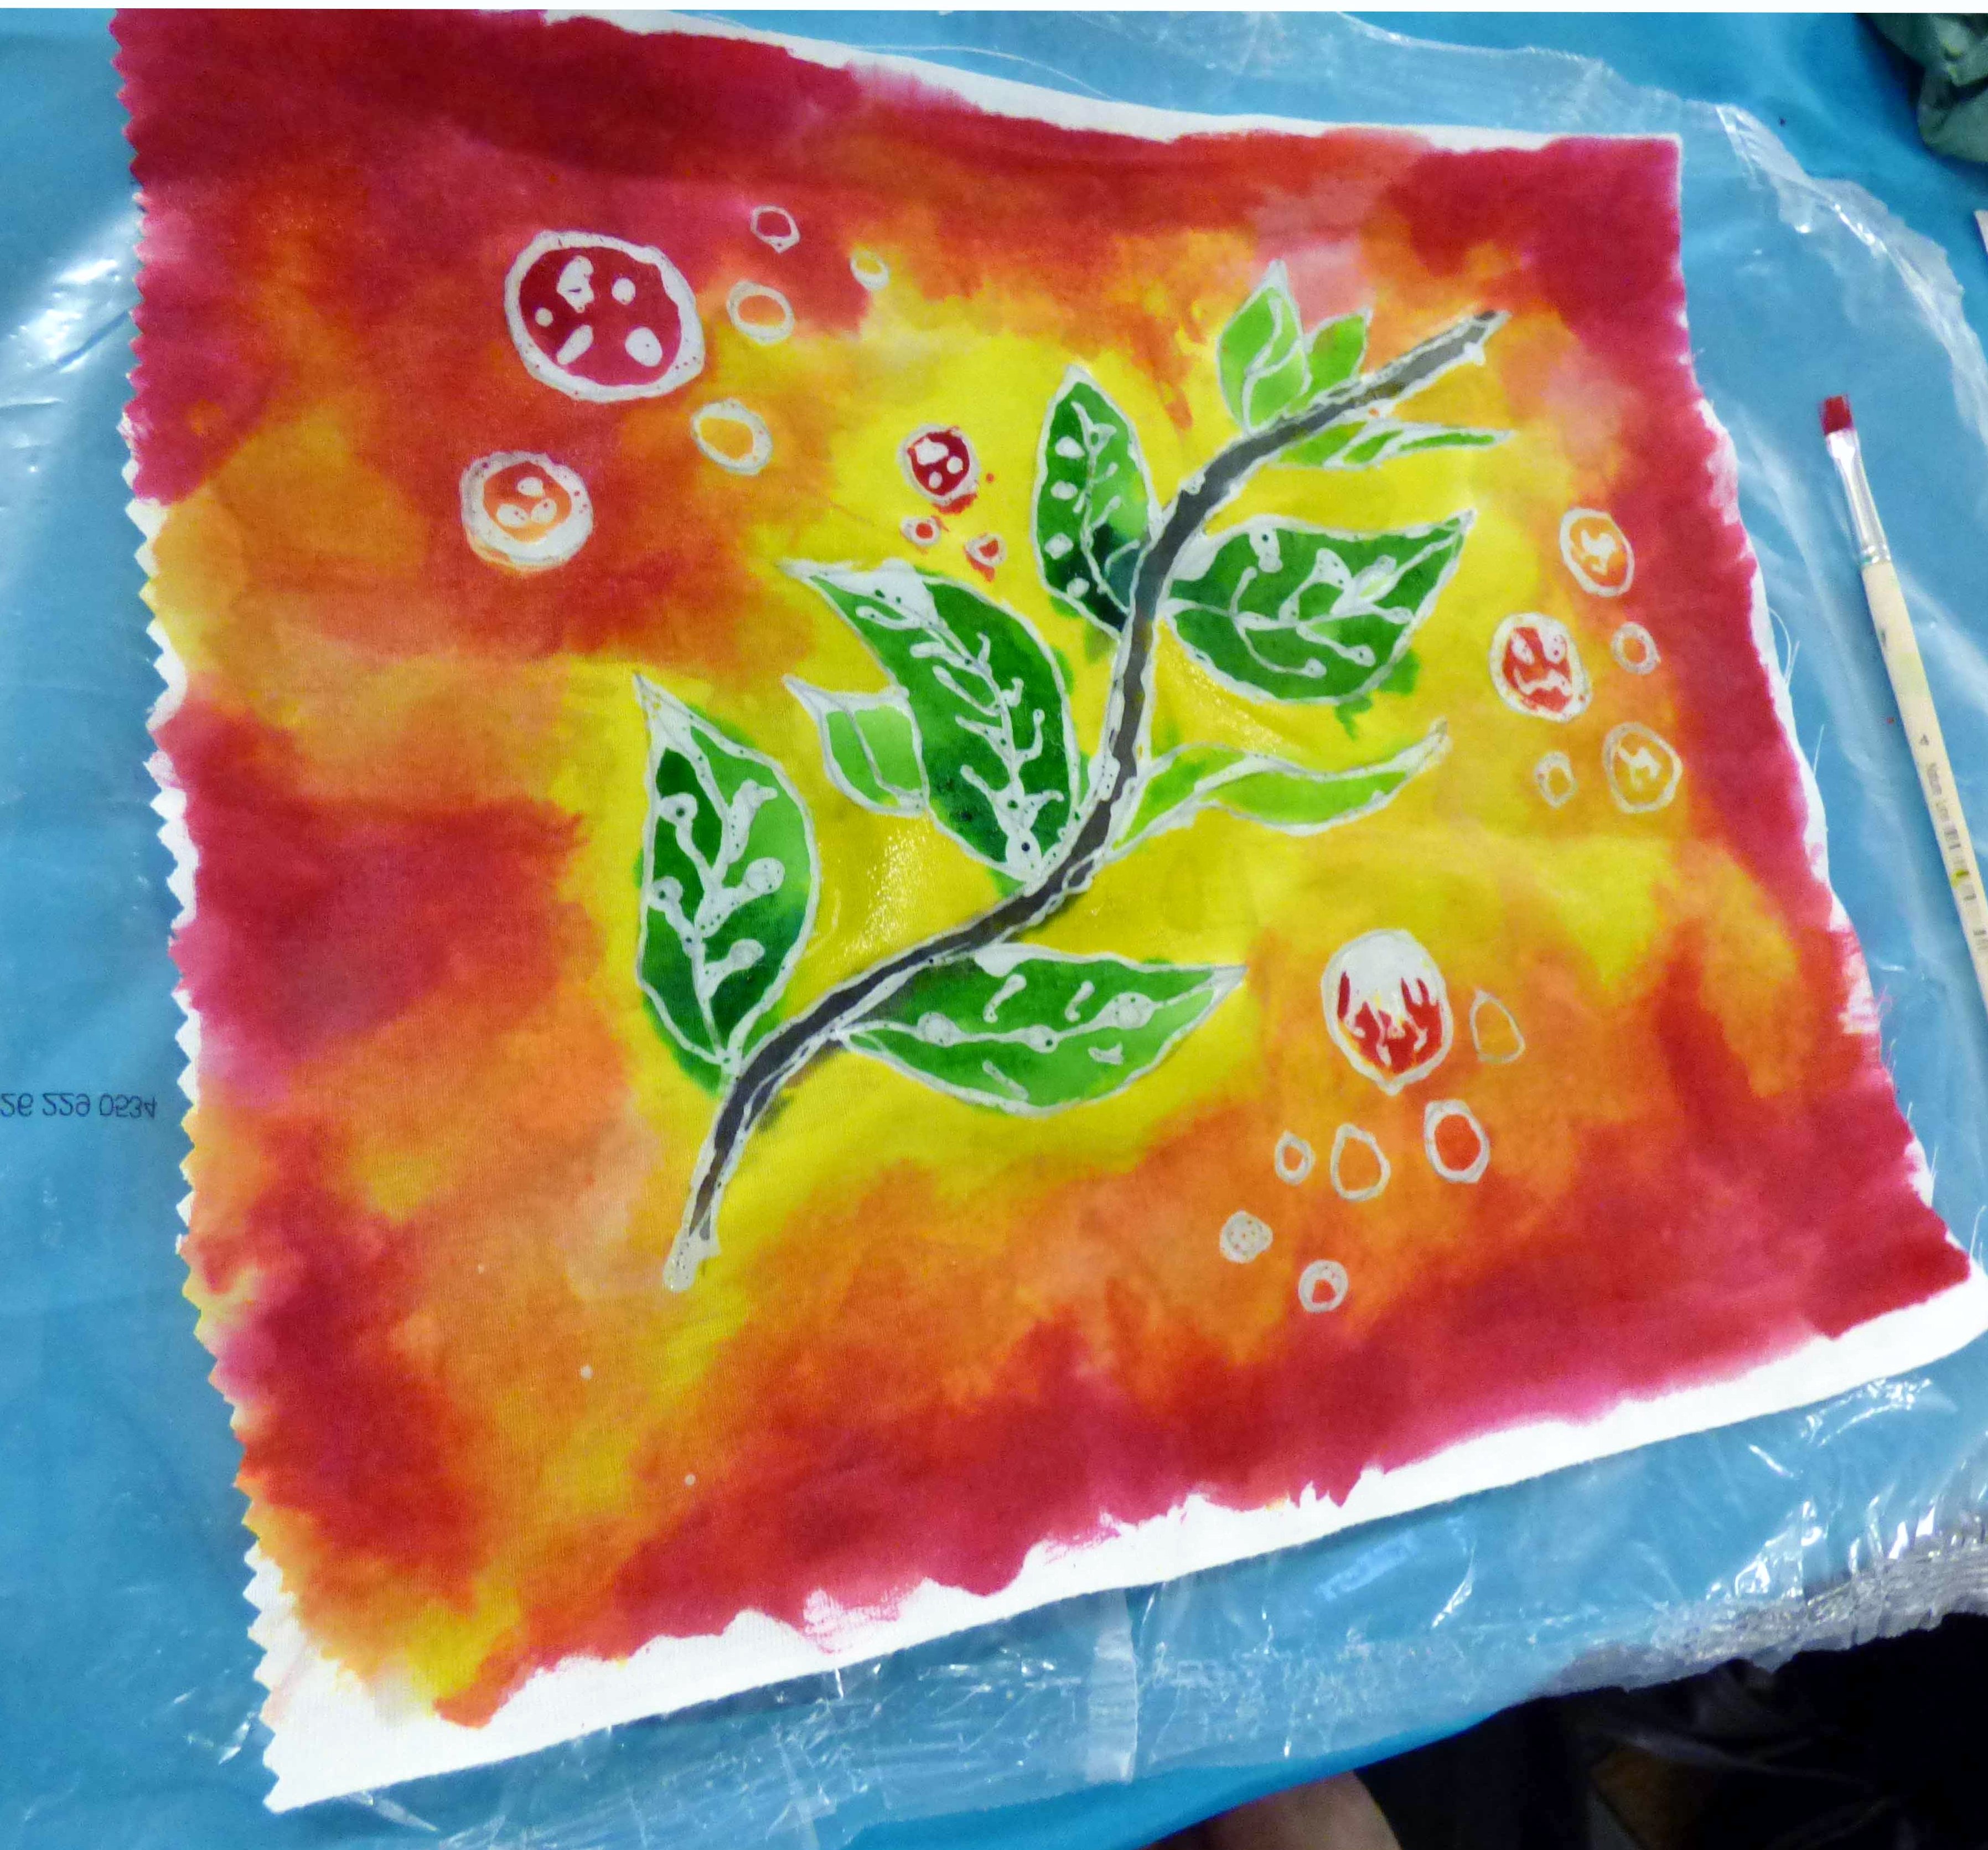 student's work in progress at "A Taste of Indonesian Batik" workshop with Victoria Riley, Feb 2020